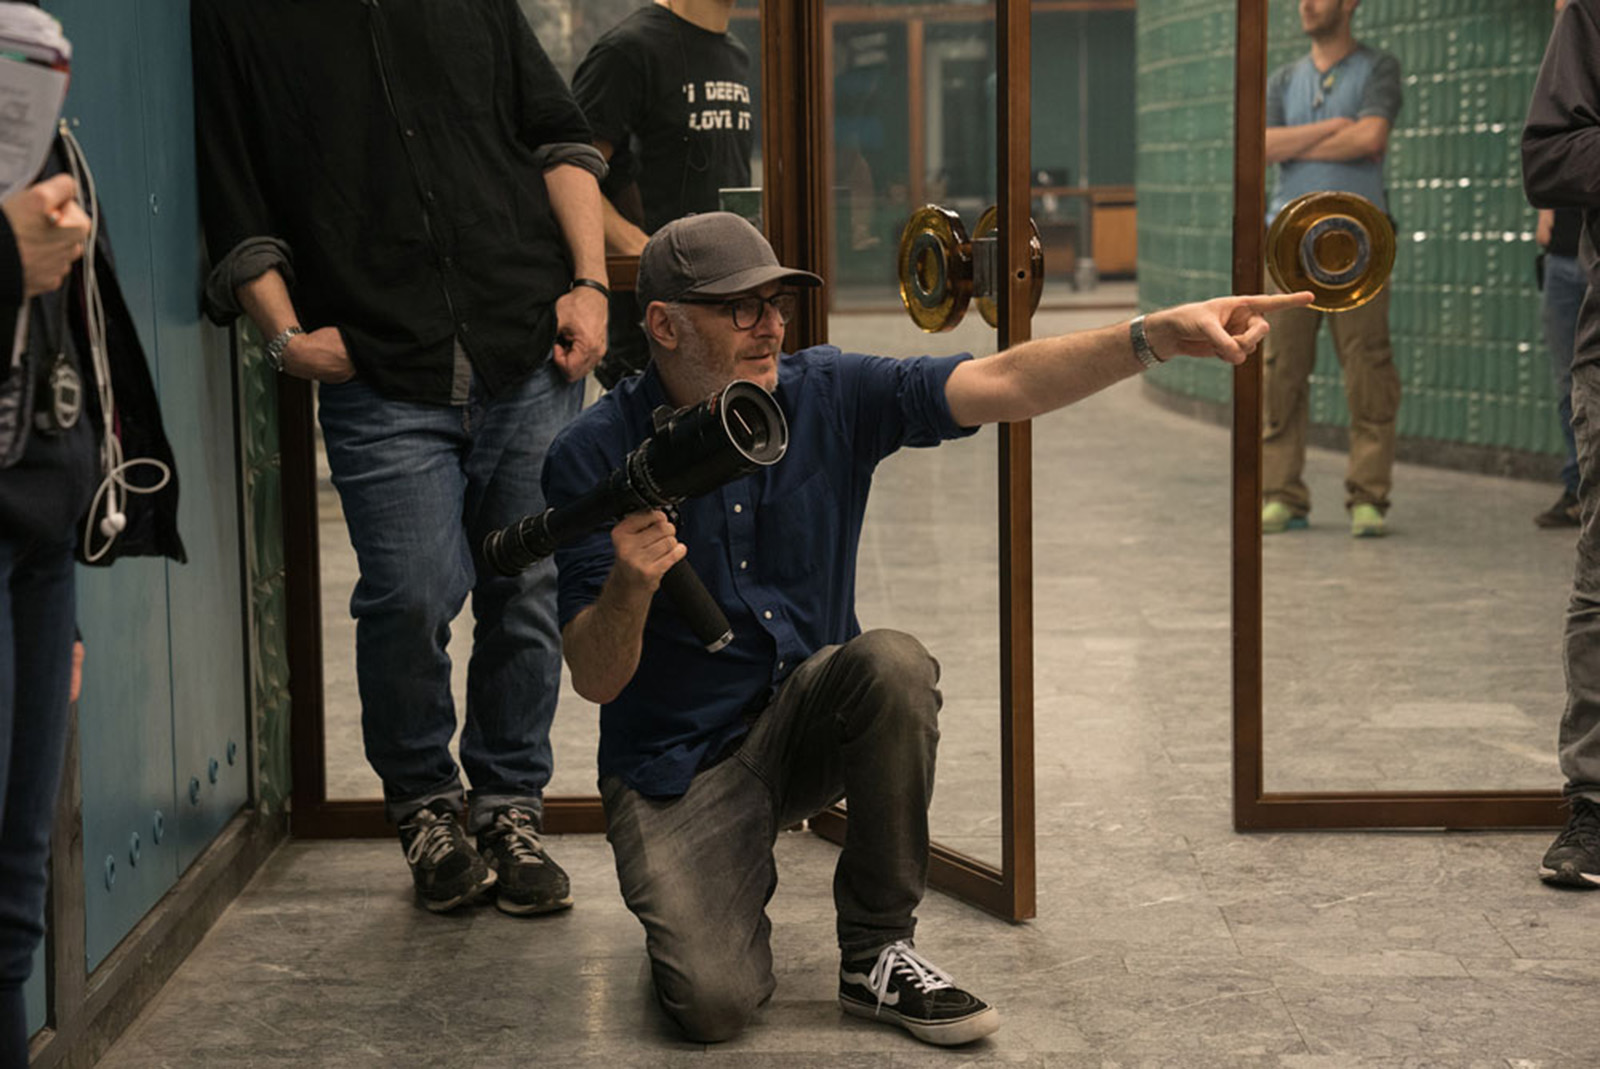 Director Francis Lawrence on the set of Red Sparrow. Image © 20th Century Fox